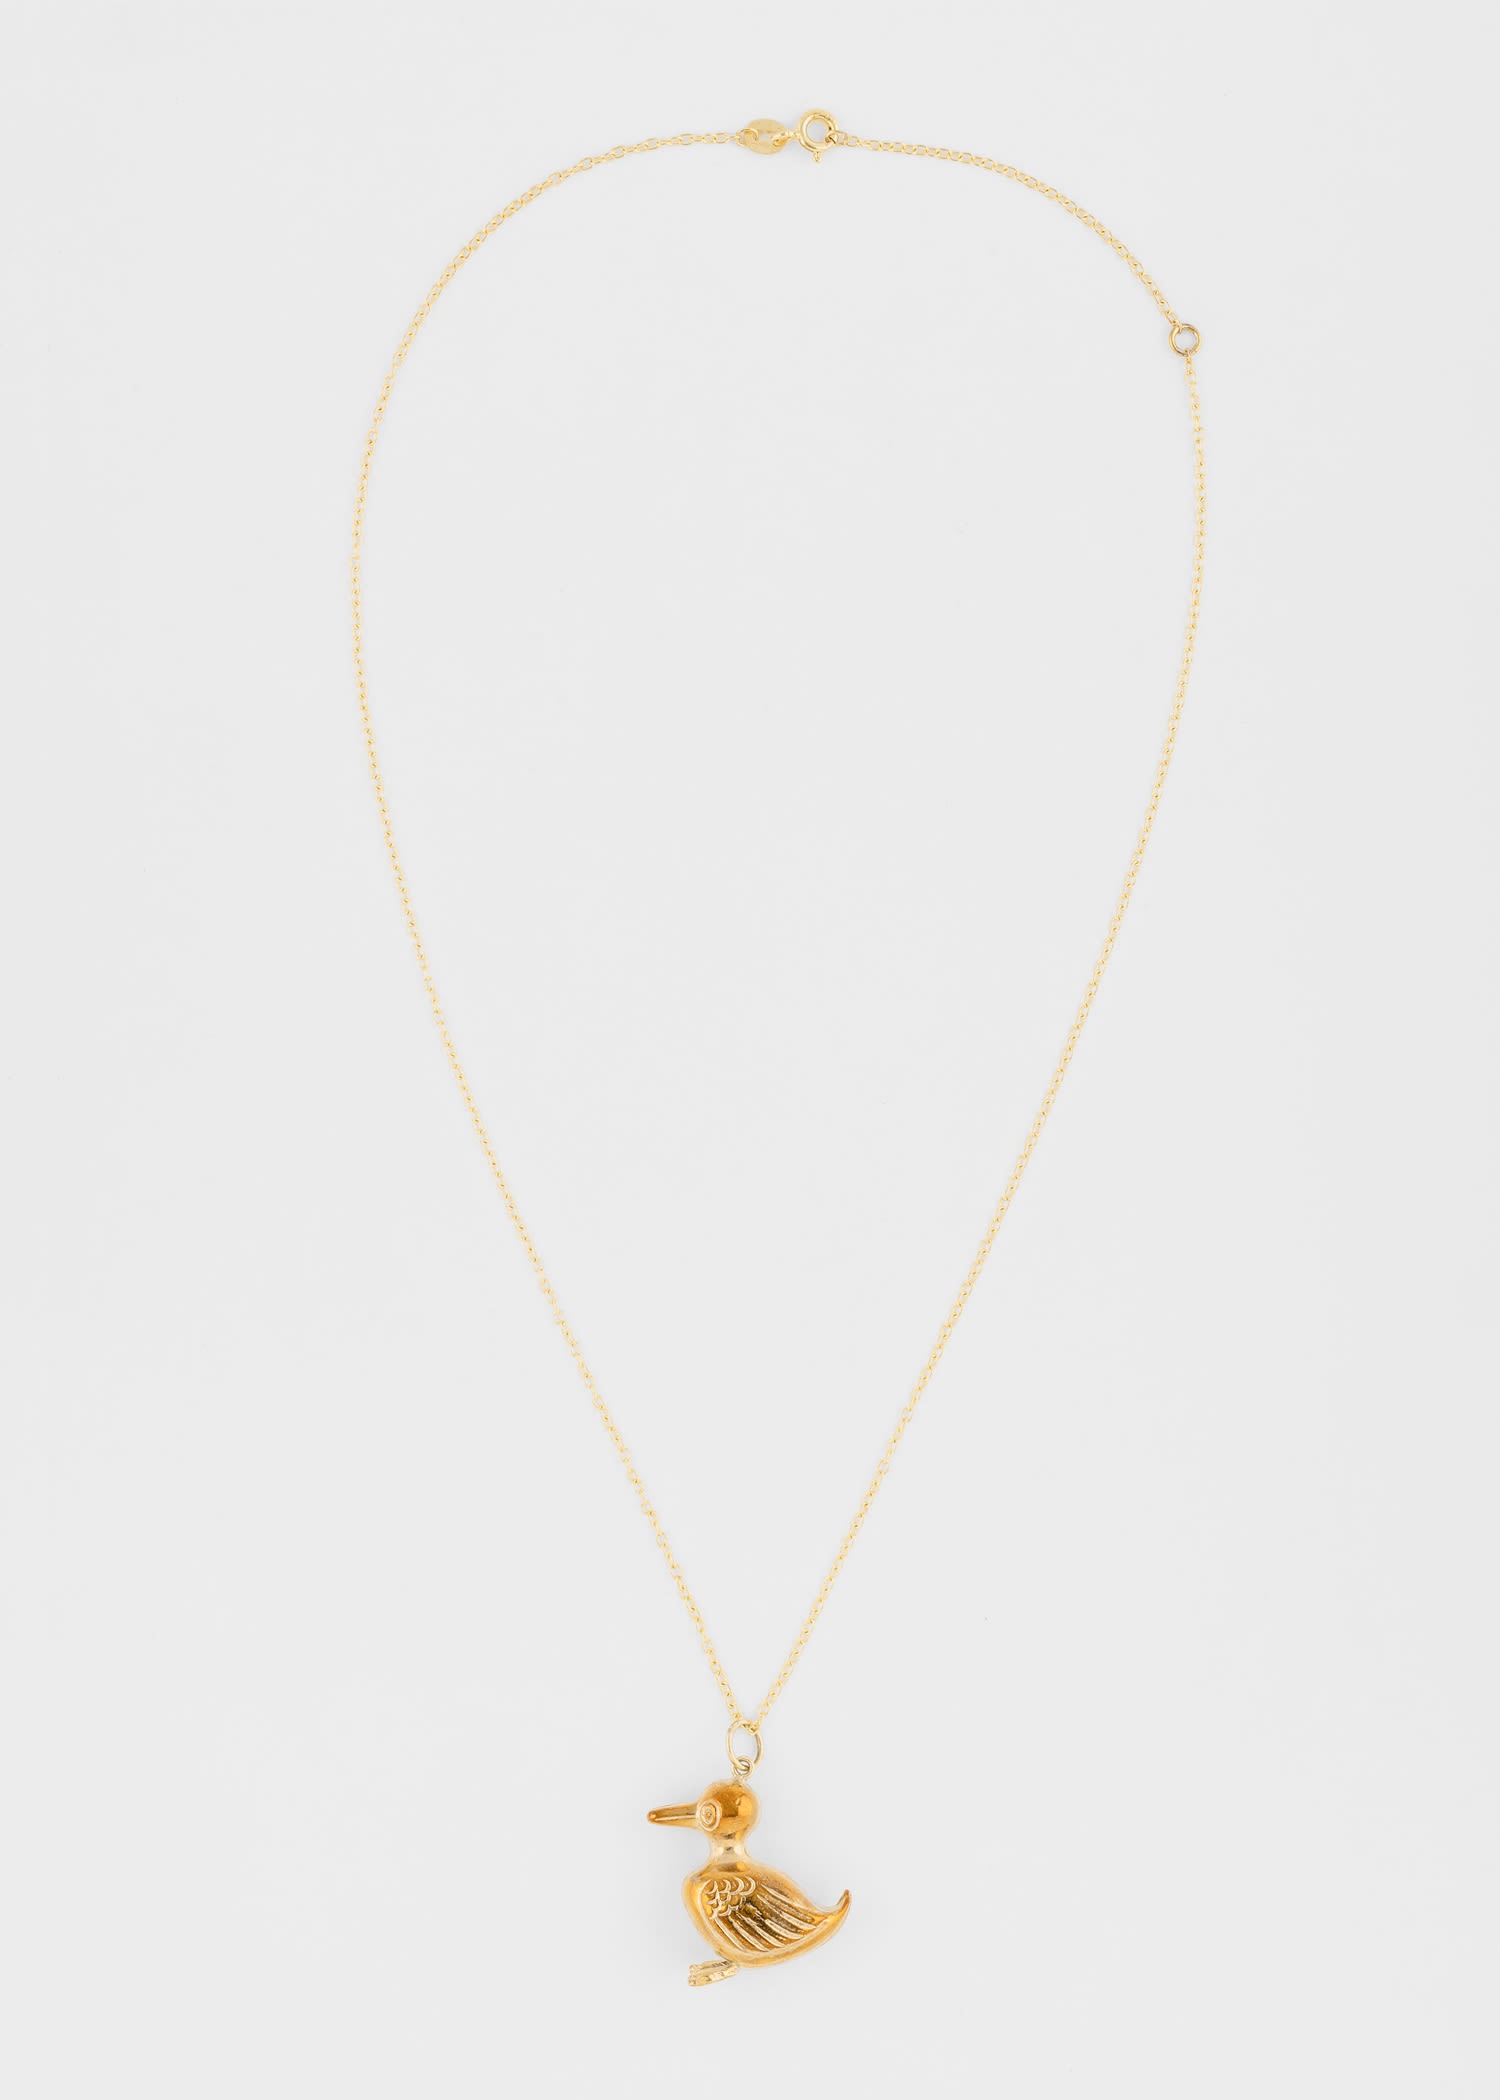 'Gold, Glorious Gold! Duck' Vintage Gold Necklace - 3